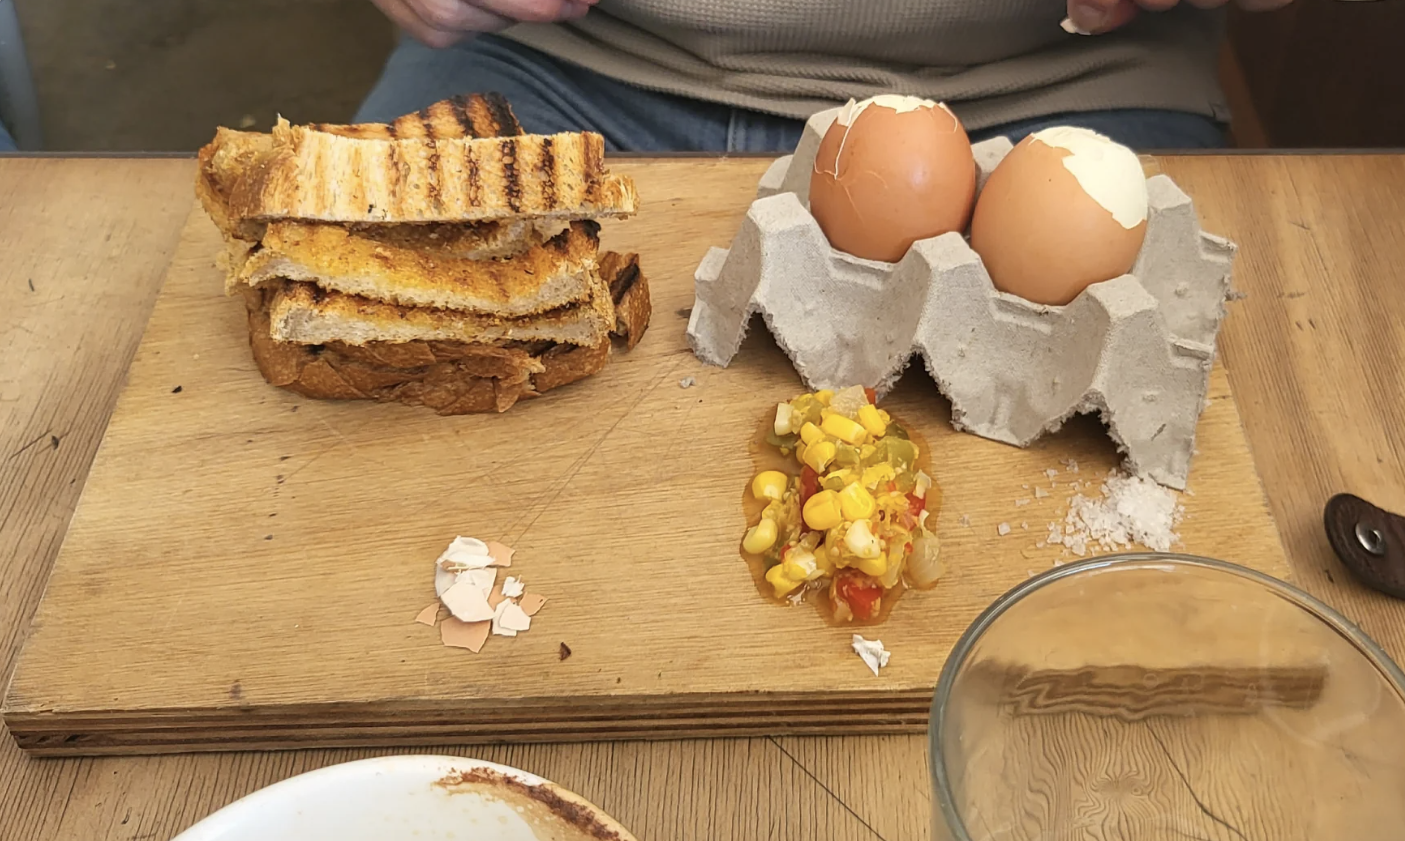 Person at table with a breakfast set, including boiled eggs in their shells and carton, toast, and a side of corn and tomatoes